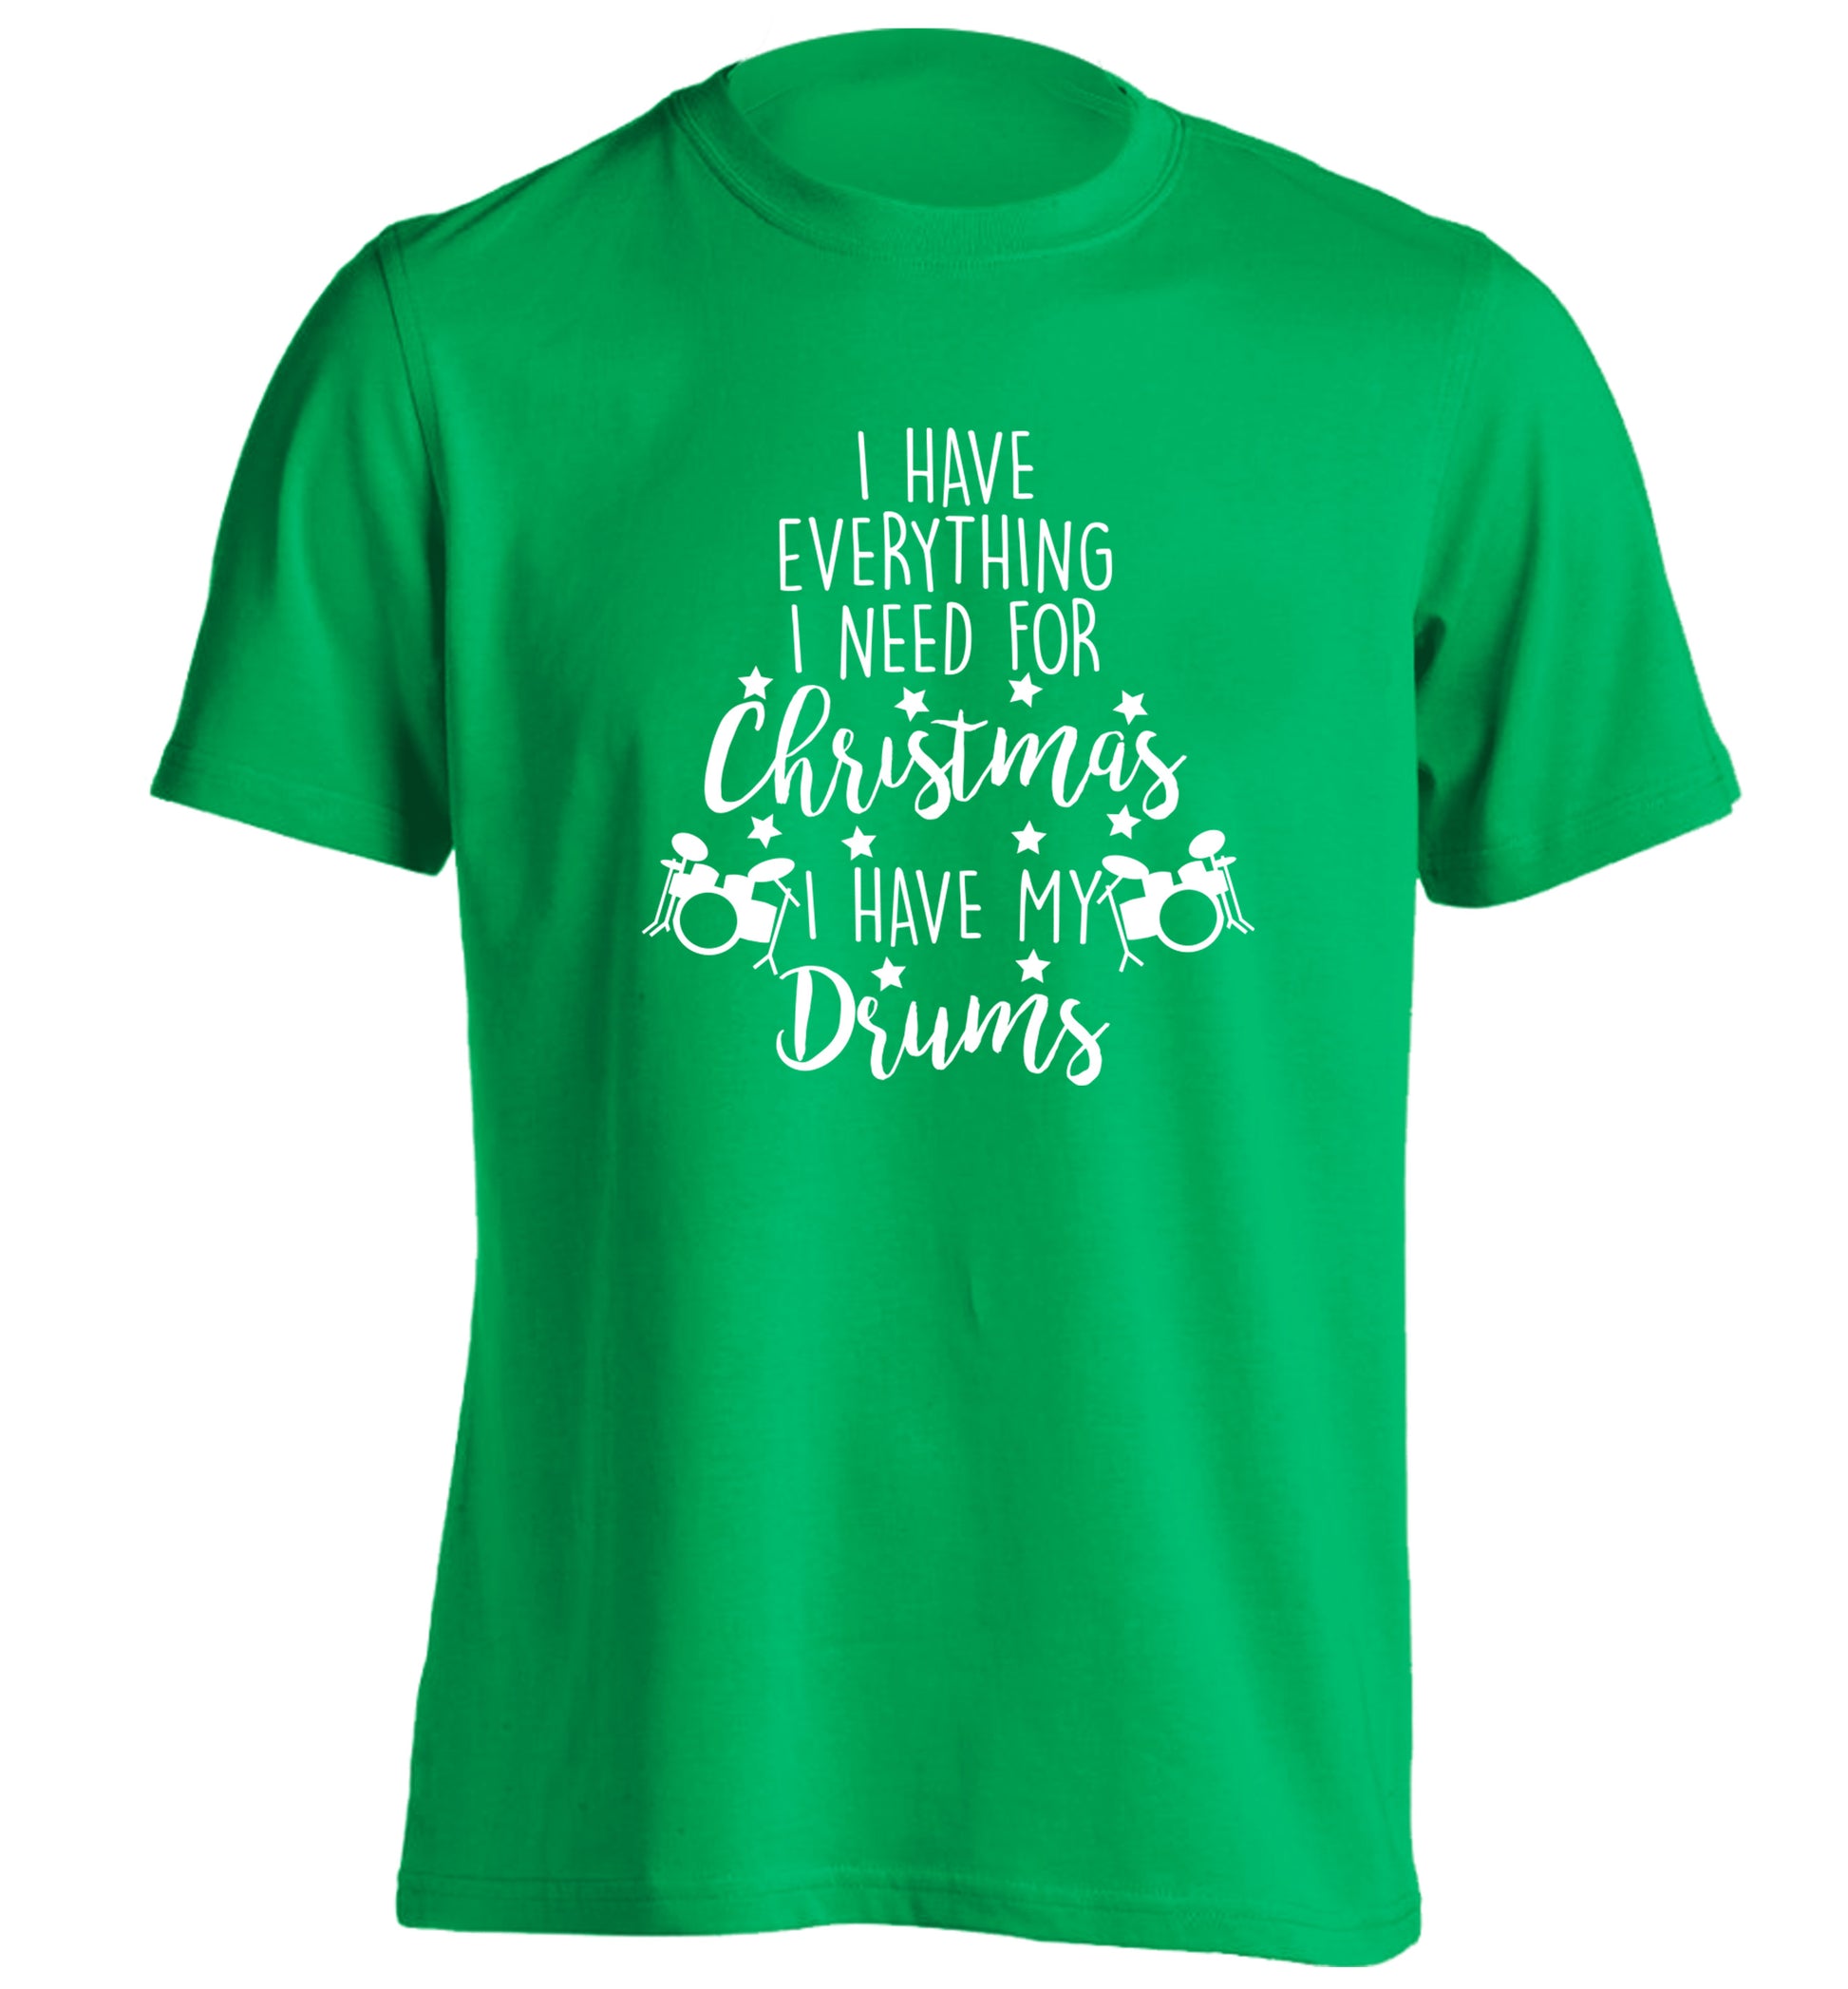 I have everything I need for Christmas I have my drums! adults unisex green Tshirt 2XL